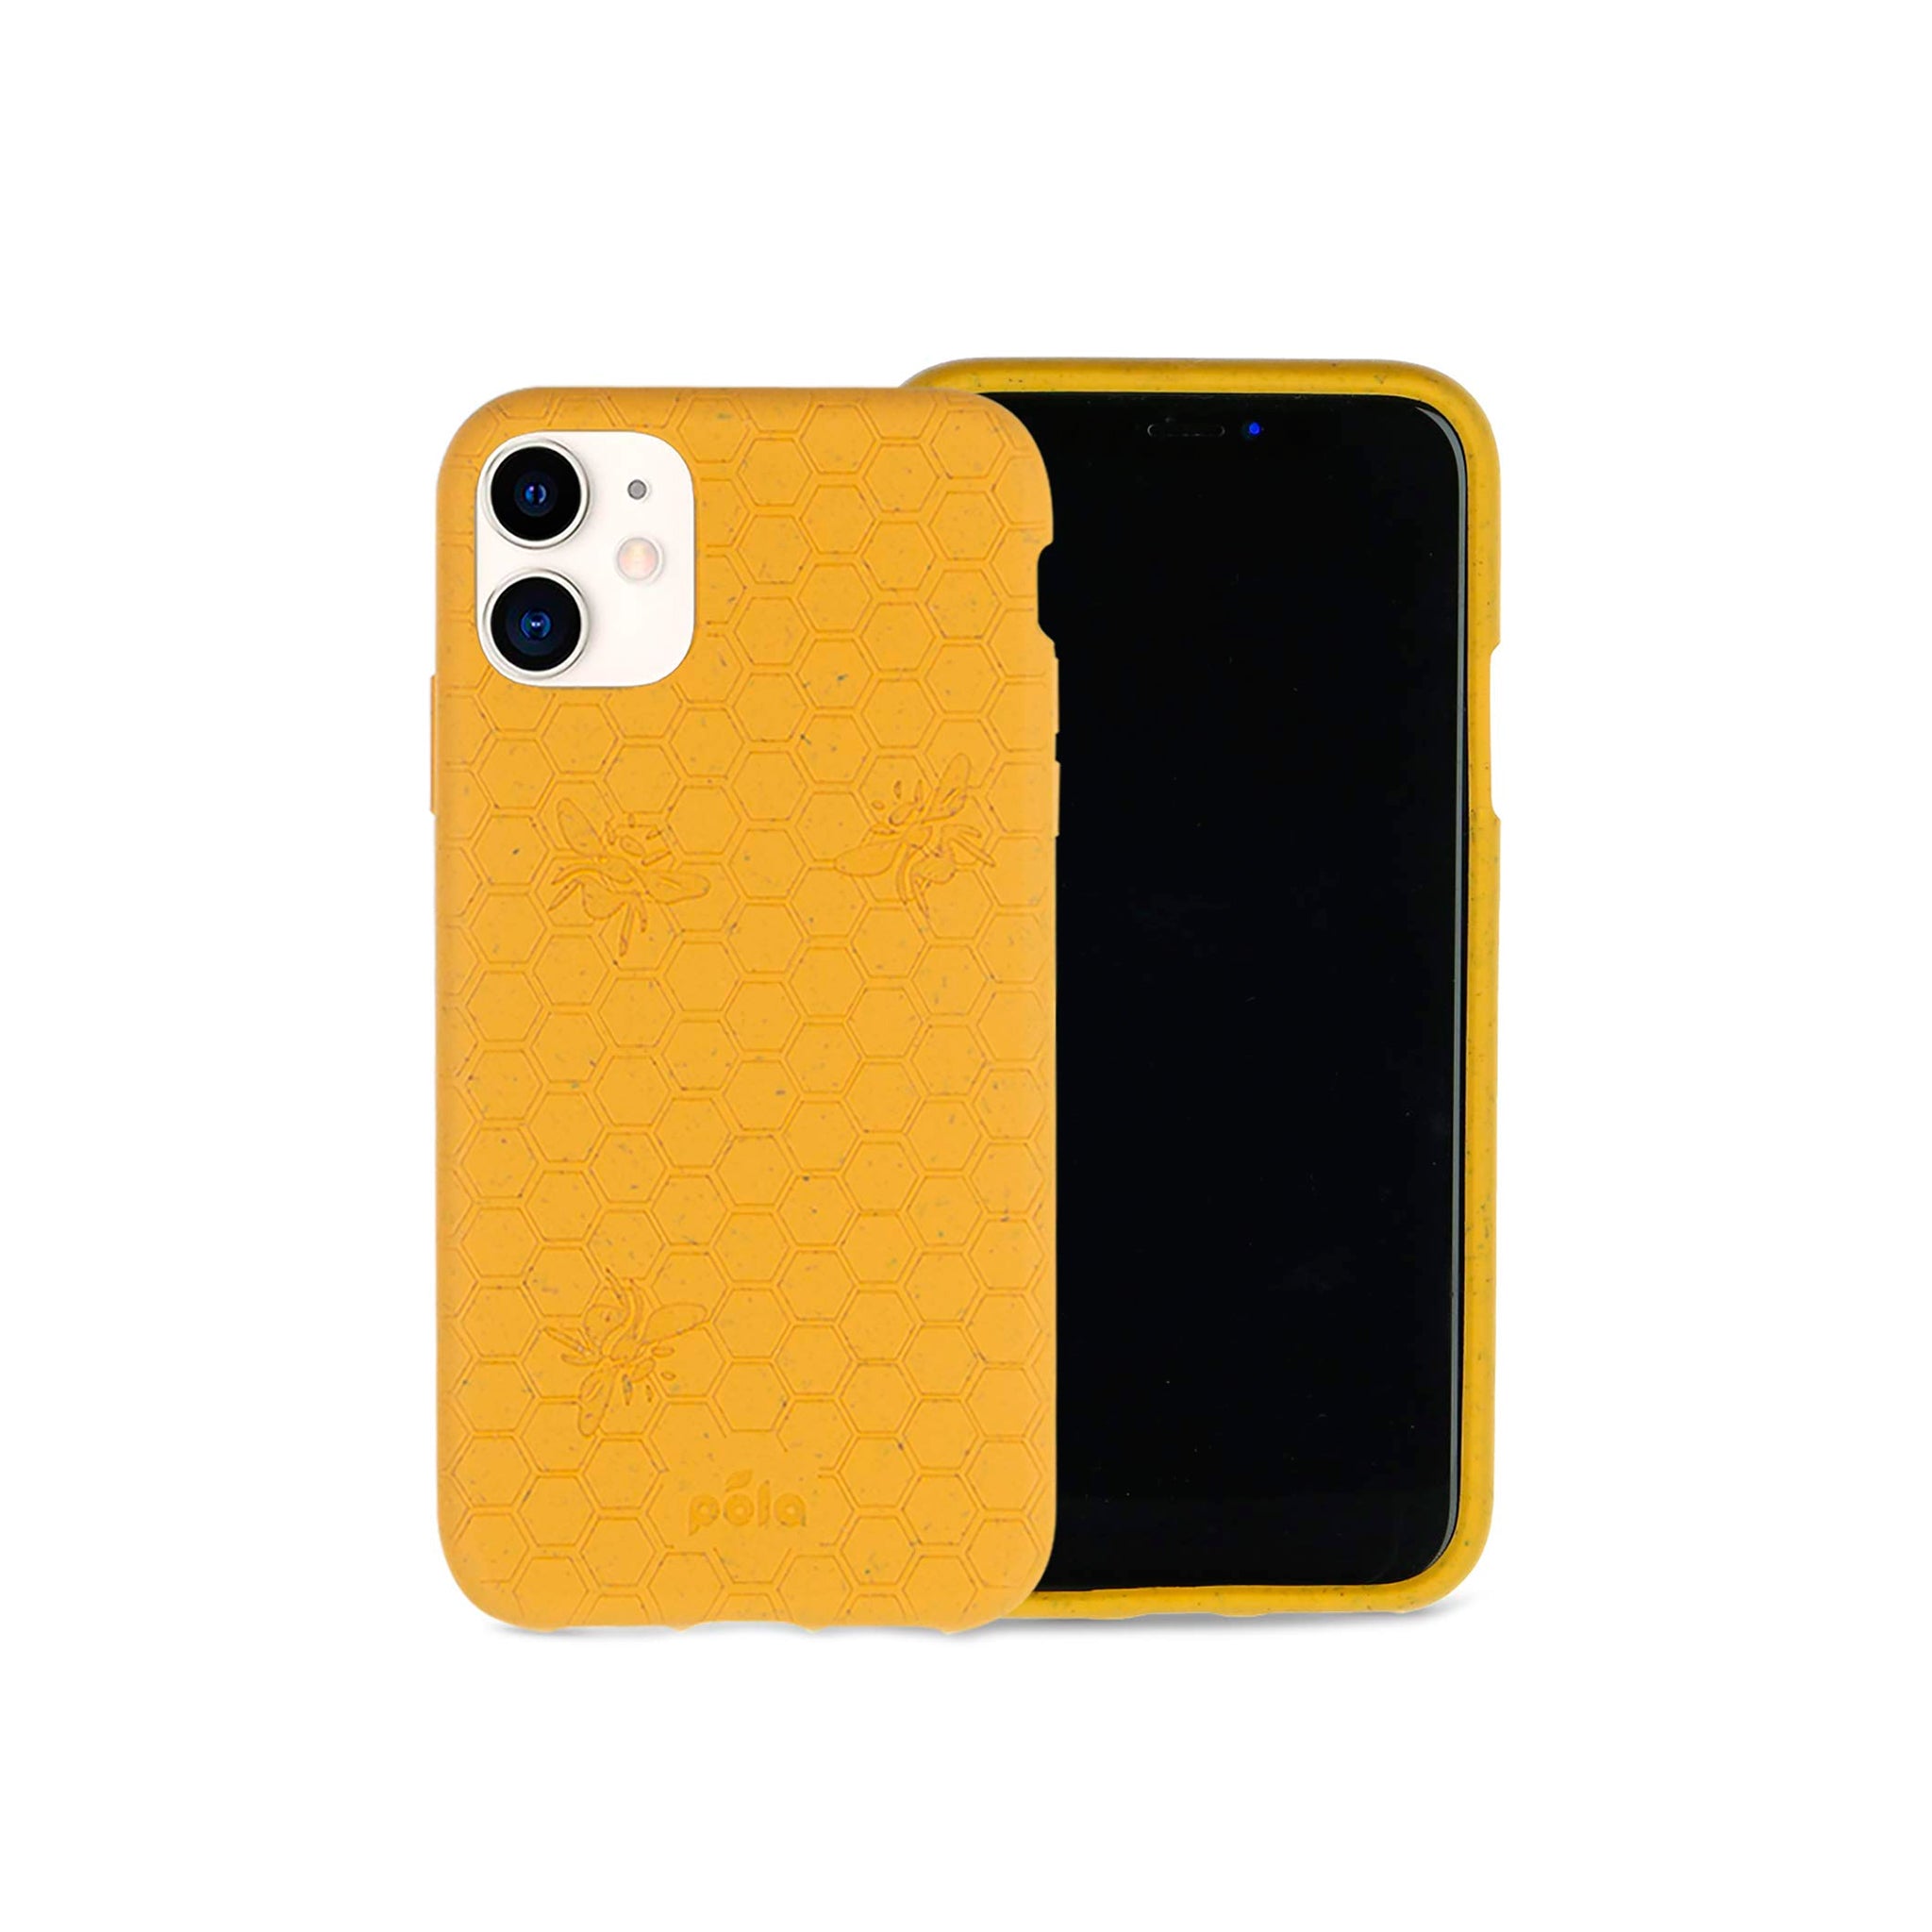 Pela - Eco Friendly Case For Apple Iphone 11 - Honey Bee Edition